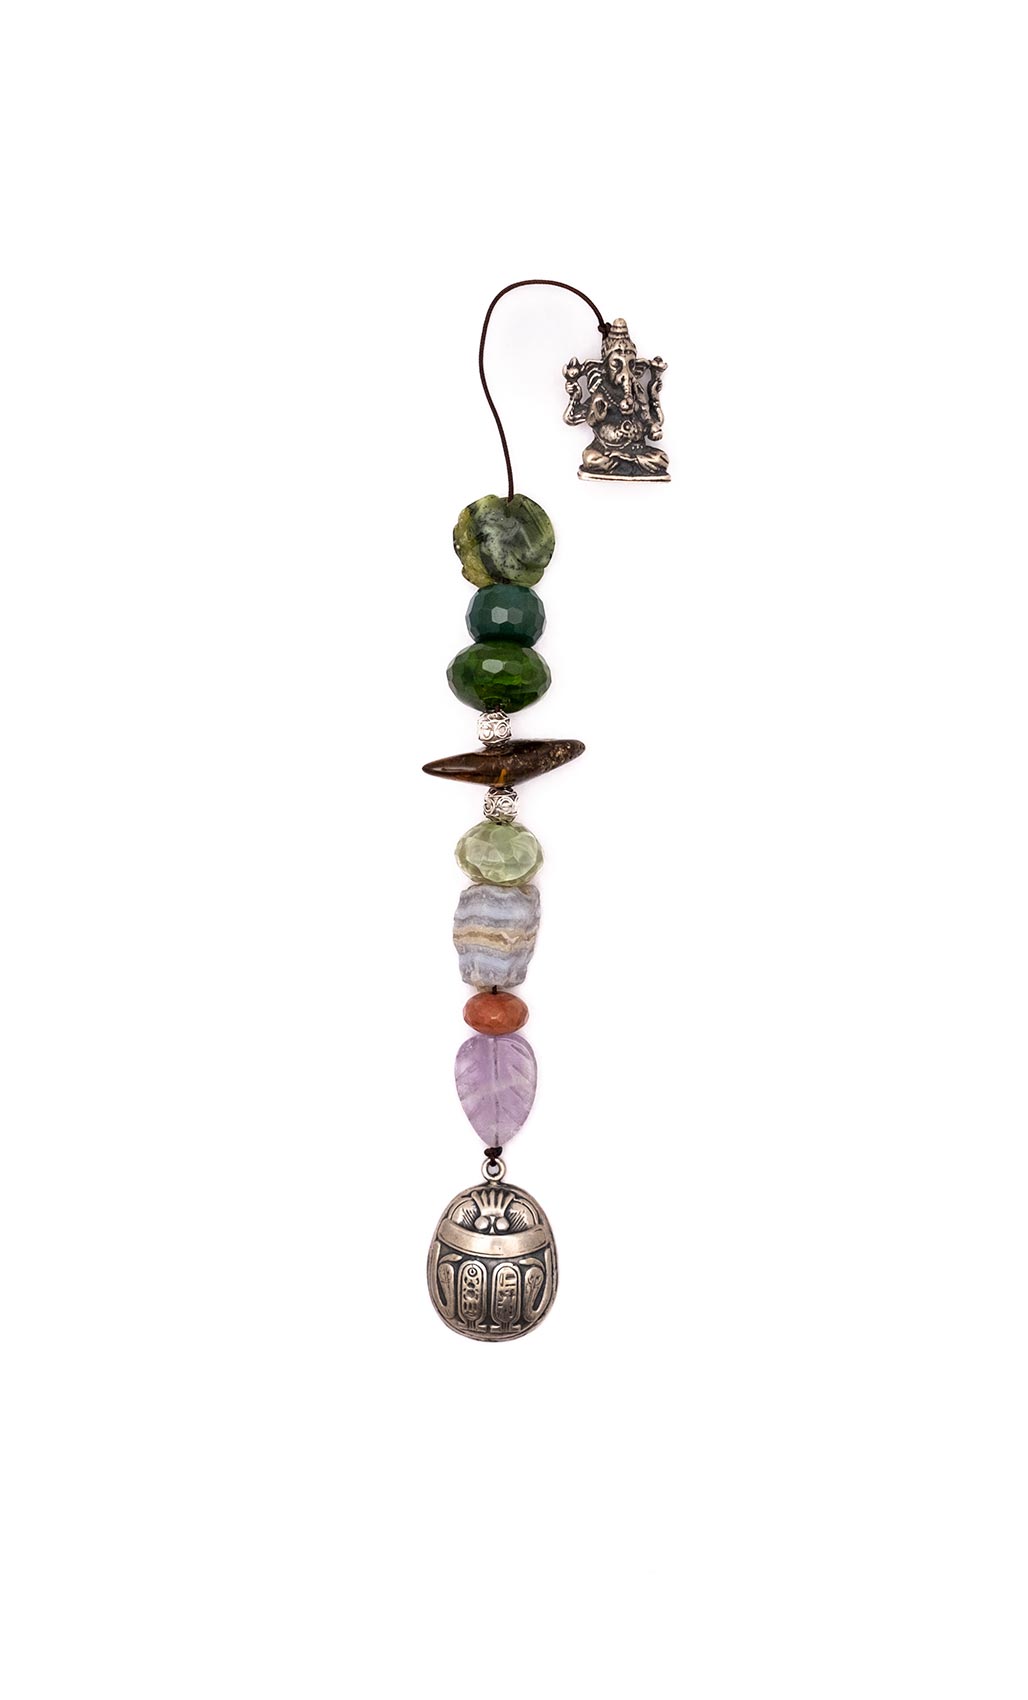 Fairy - Scarab : For the joy and pleasure of daily things. Amulet with semi-precious stones: Carnelian,jasper,genuine amber from Baltic sea-cut by hand, Jade, pink quartz,mineral  turquoise, lapis lazouli, amethyst, tin.